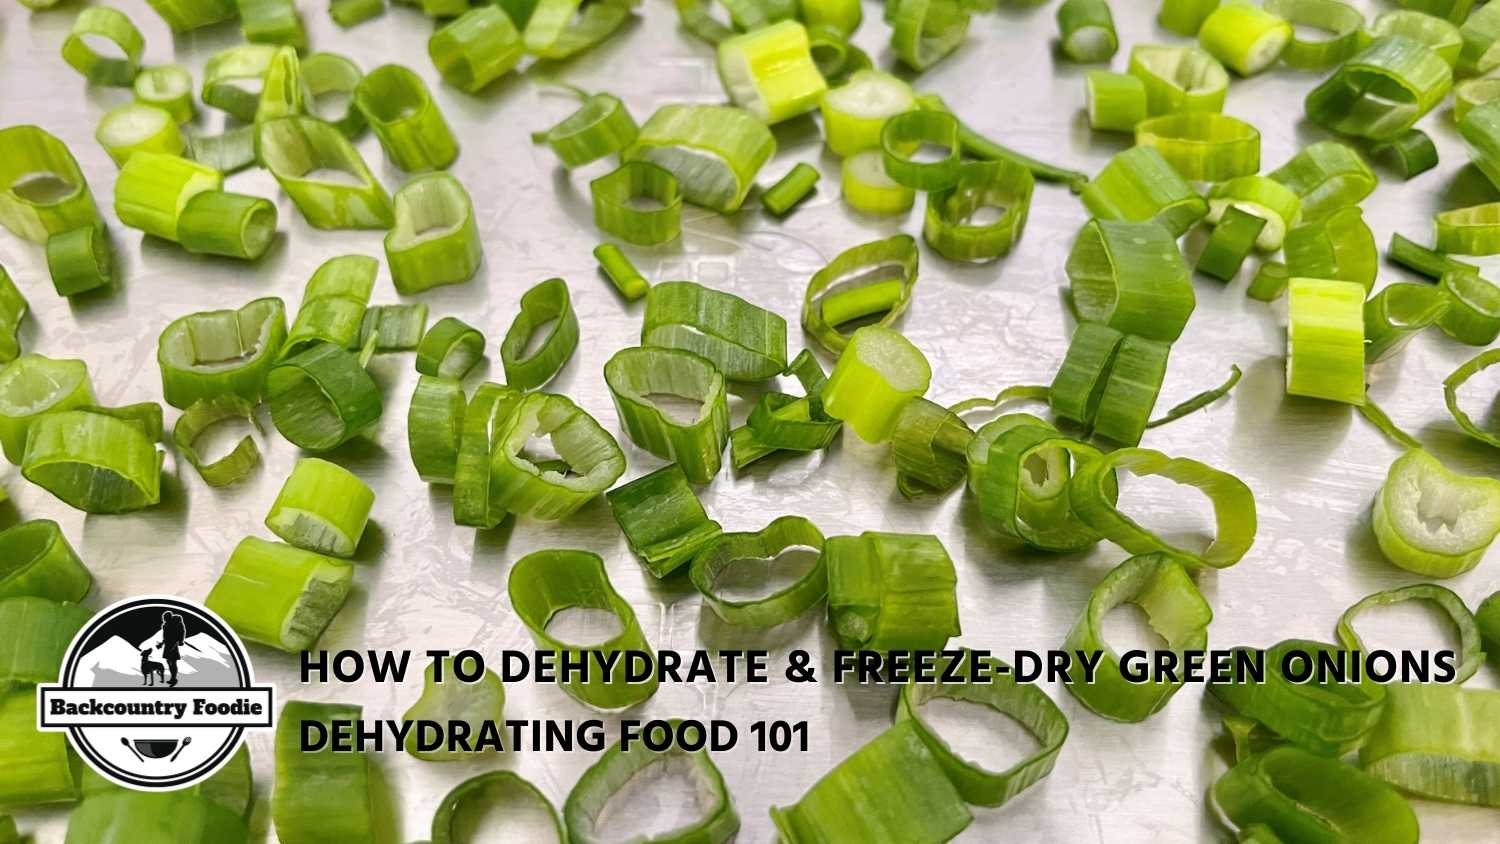 Learn how to safely dehydrate or freeze-dry green onions for backpacking meals and enjoy a Veggie Pho Noodle Soup recipe! #howtodehydrategreenonions #howtofreezedrygreenoions #dehydrated scallions #backpackingmealideas #howtodehydratefood #backcountryfoodie